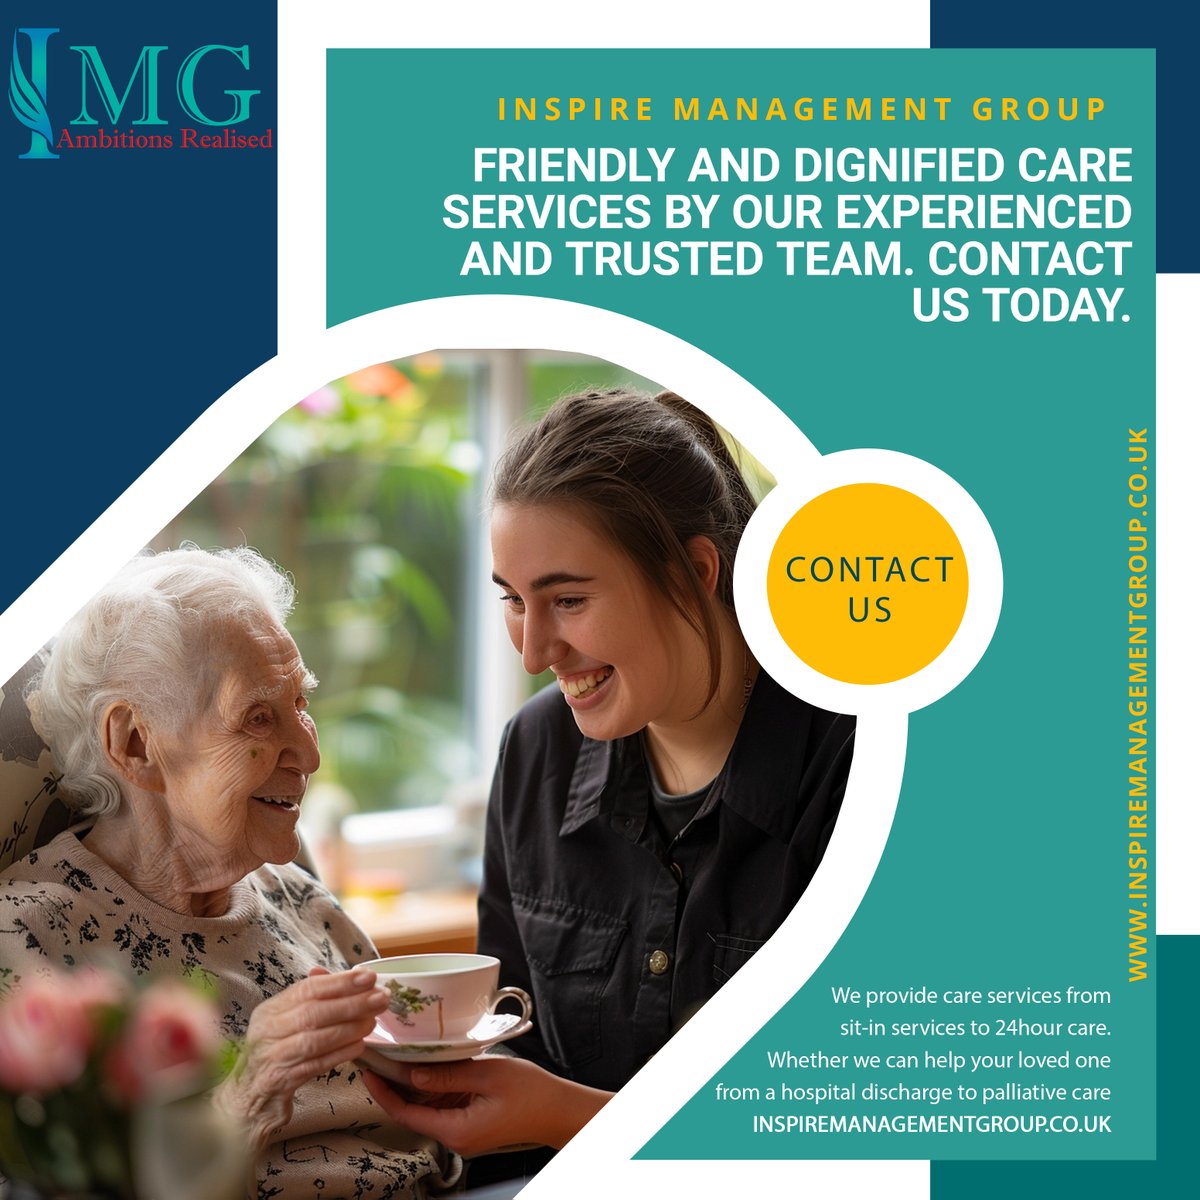 Friendly and dignified care services by our experienced and trusted team. Contact us today inspiremanagementgroup.co.uk #care #carer #careservices #kingstonuponthames